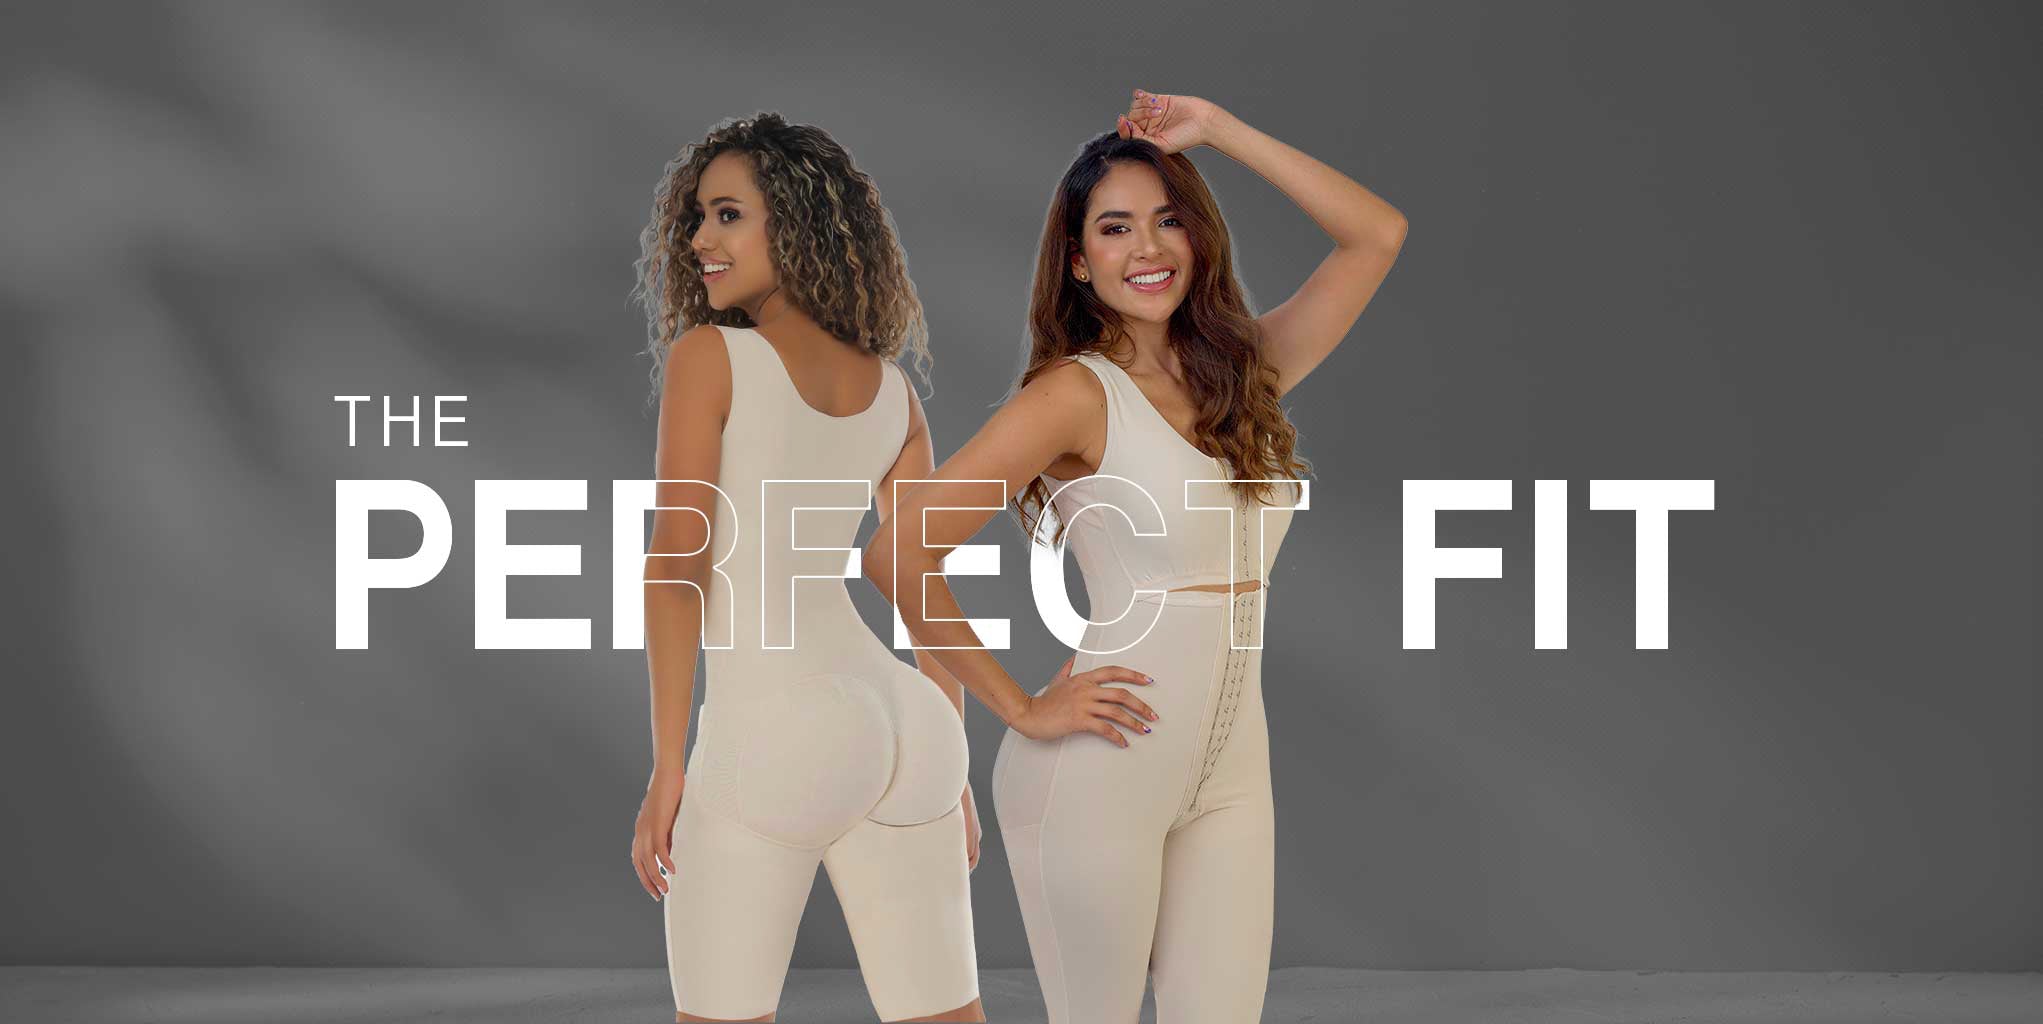 Modern Sensation 415- Cheeky bodysuit with silicone lace – fajas